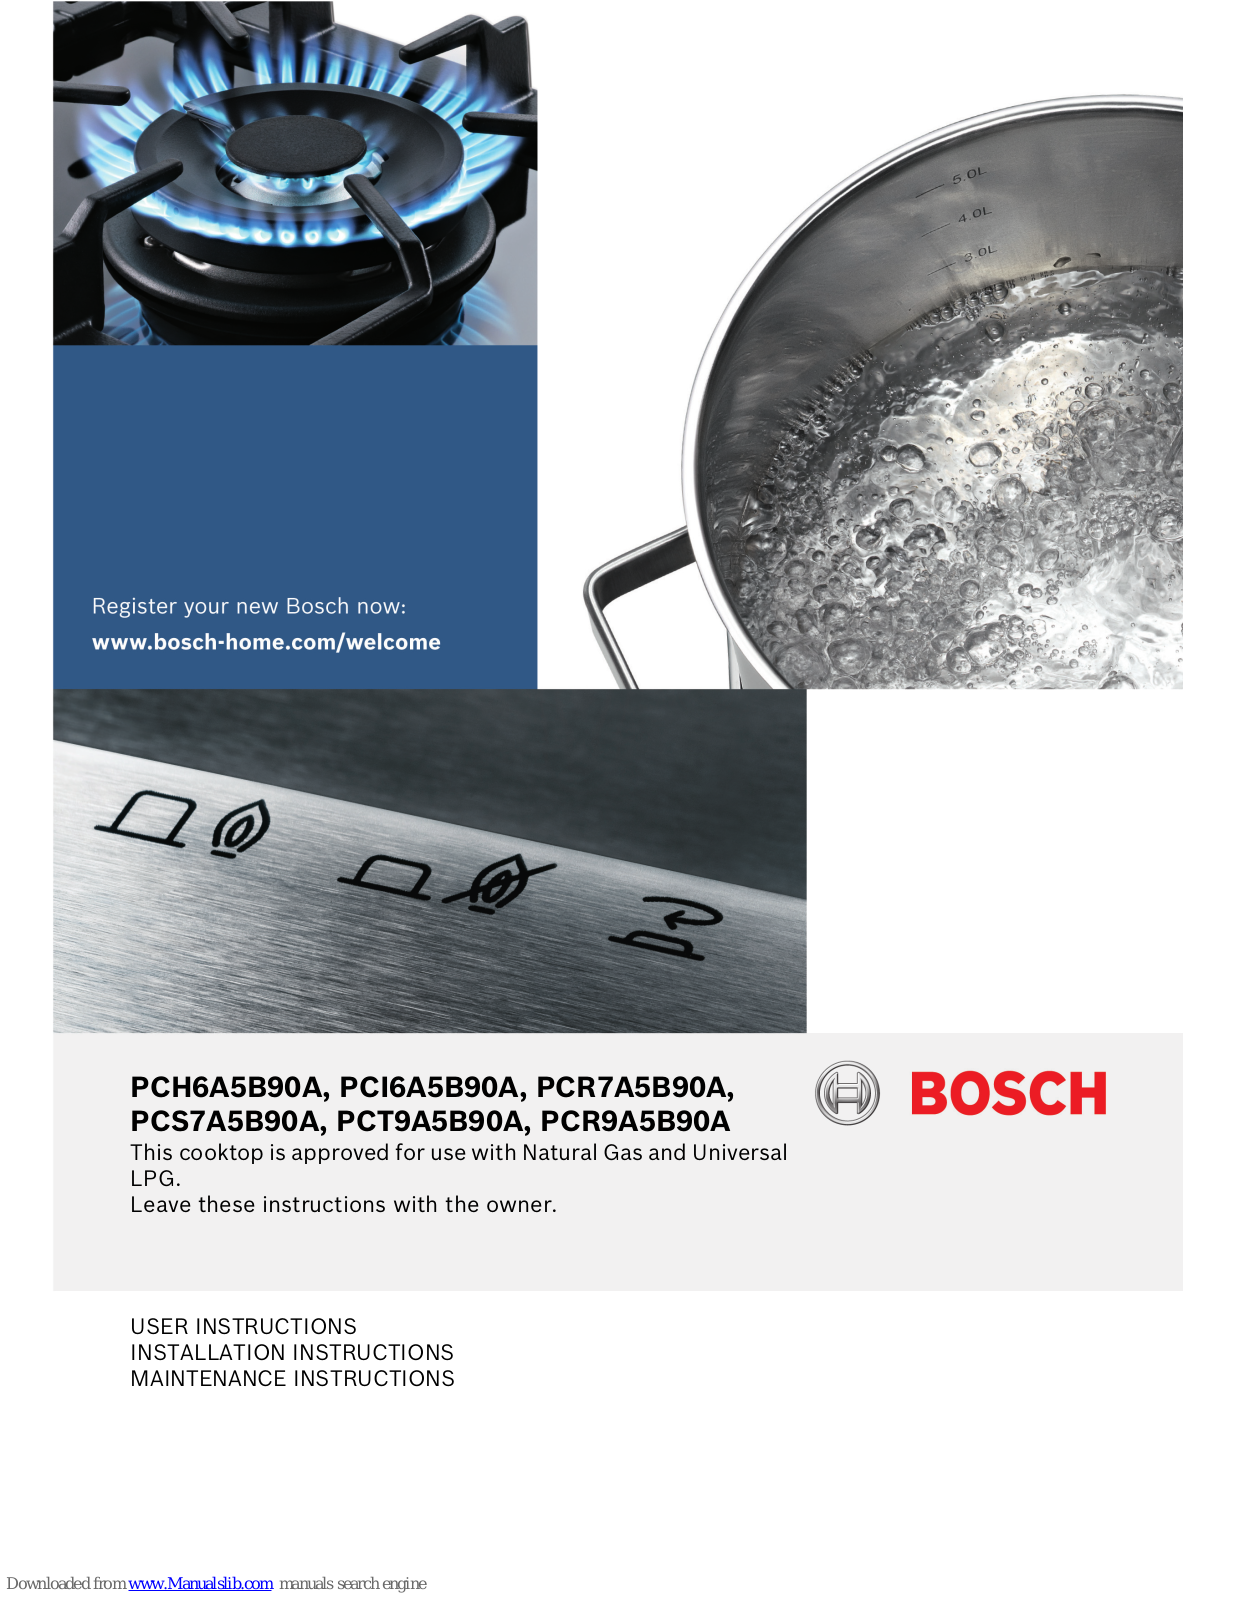 Bosch PCH6A5B90A, PCR7A5B90A, PCS7A5B90A, PPH6A6B20A, PPQ7A6B20A User, Installation And Maintenance Instructions